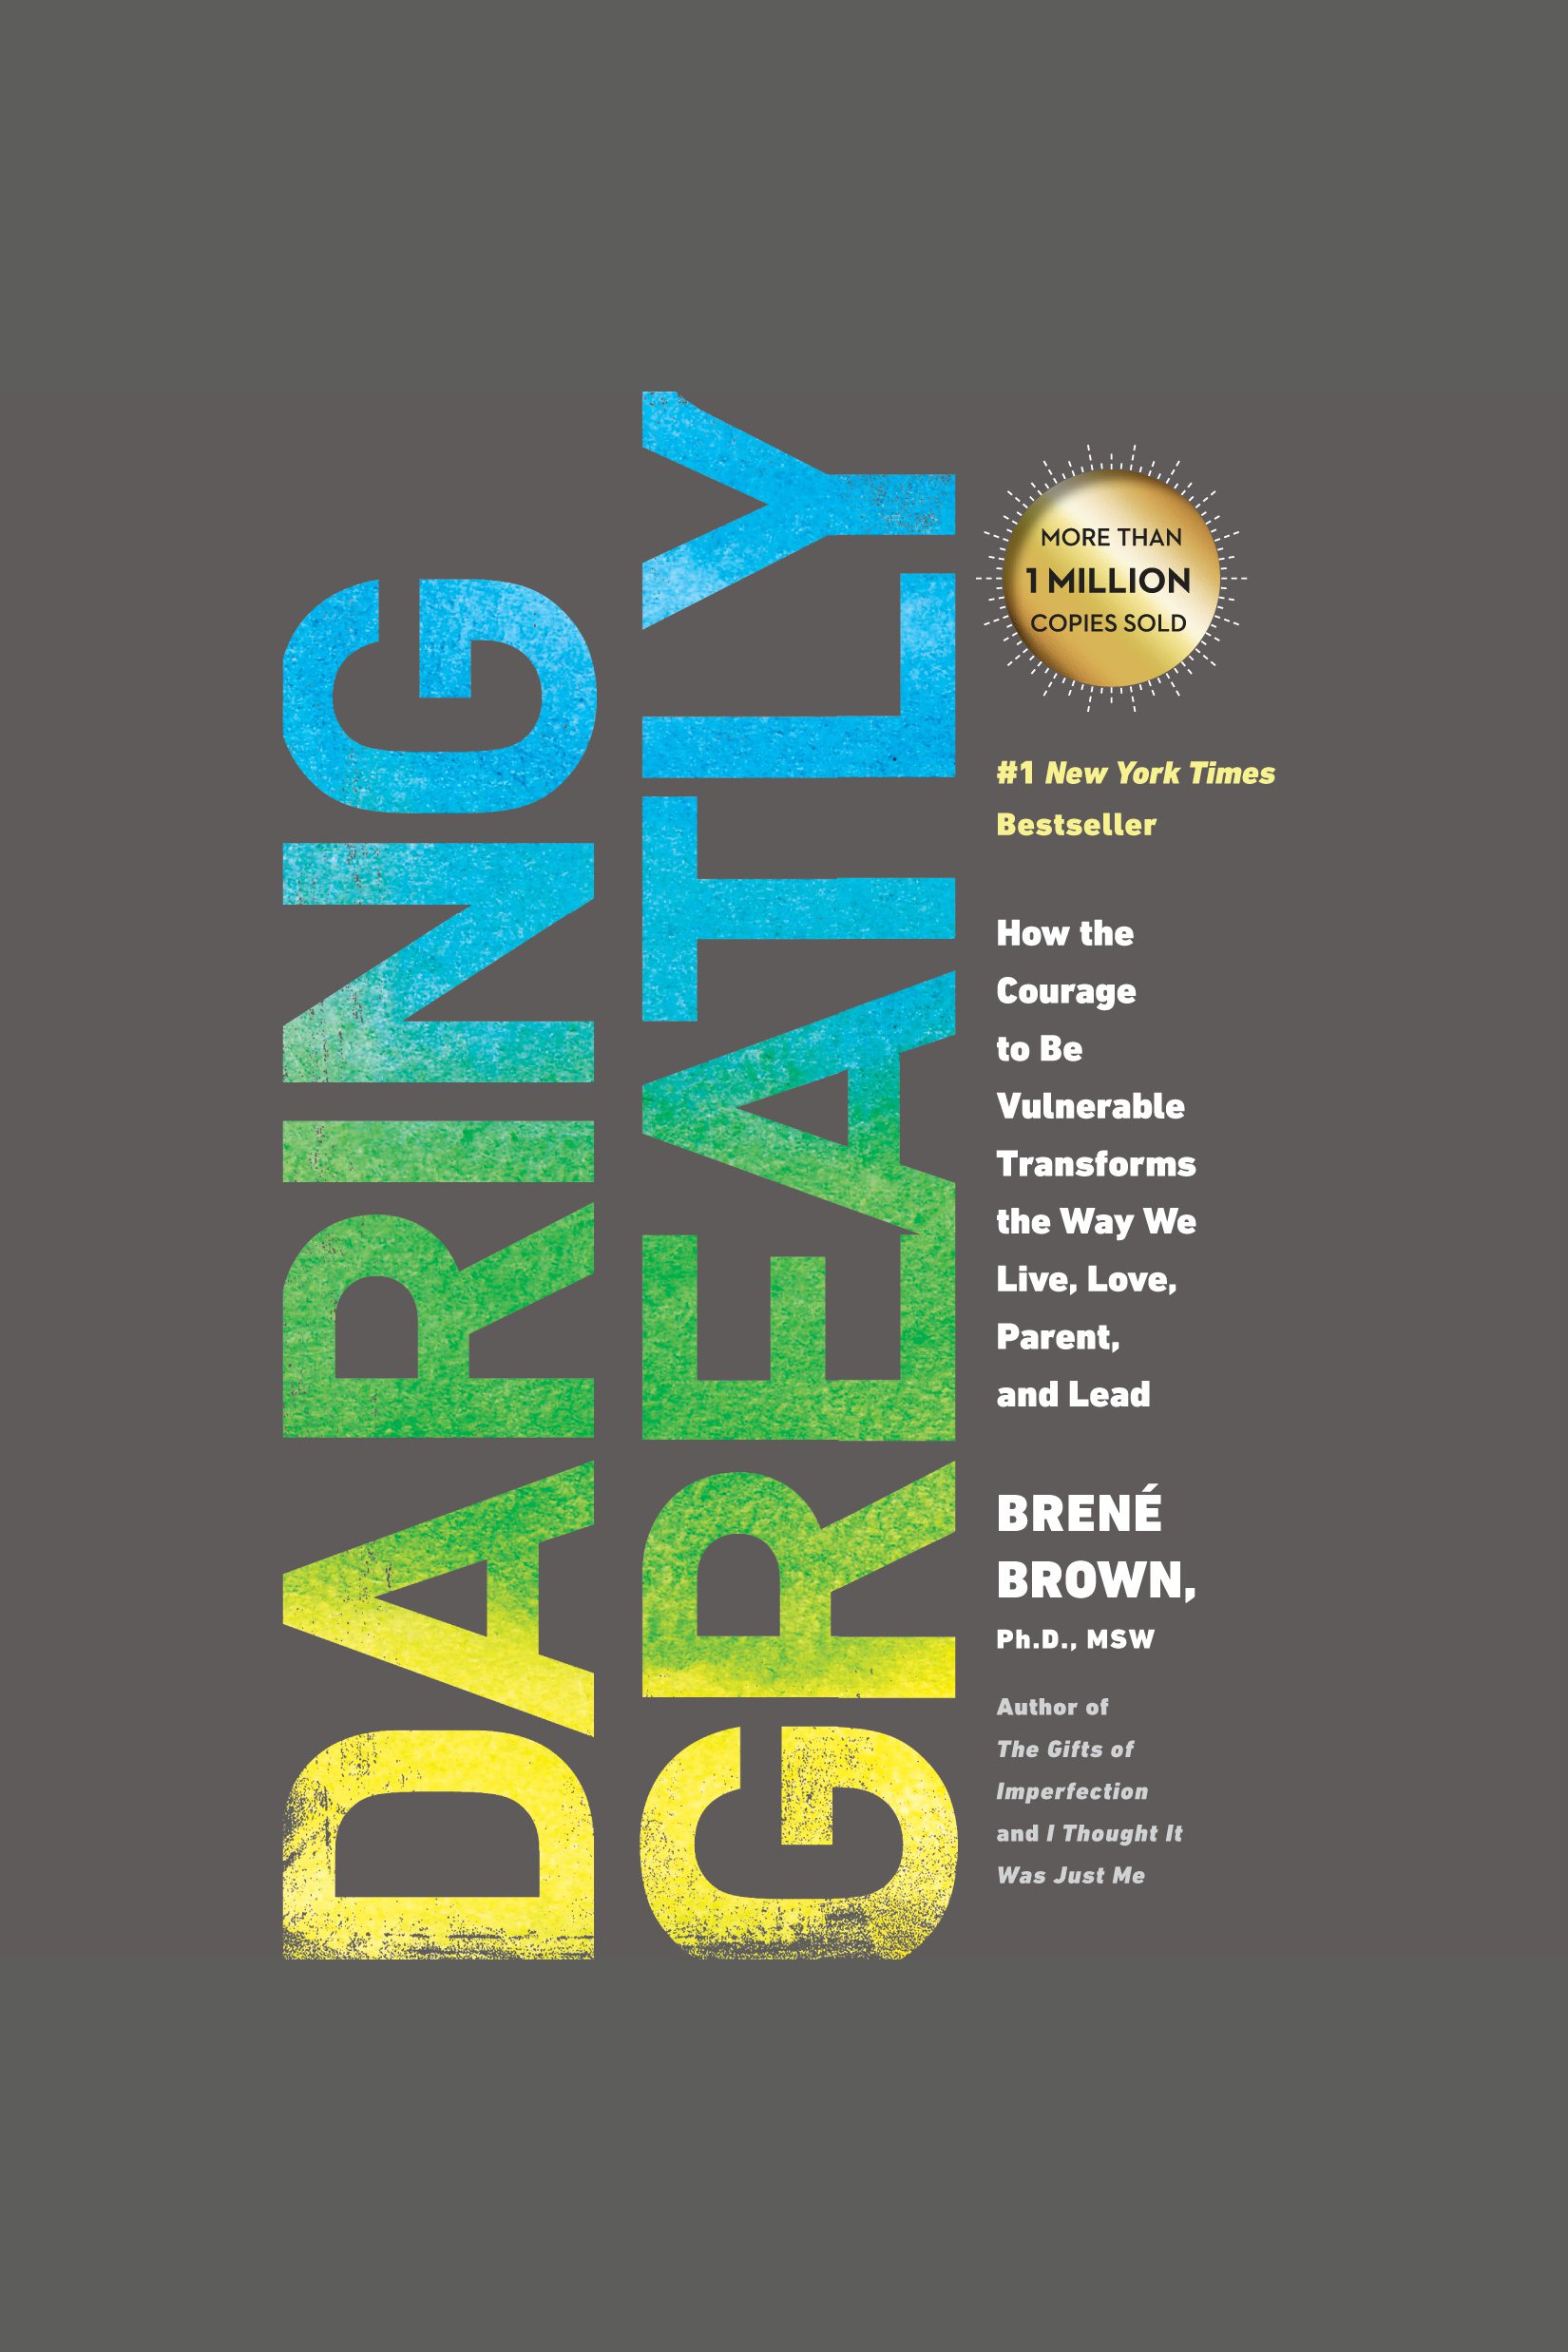 Daring greatly how the courage to be vulnerable transforms the way we live, love, parent, and lead cover image